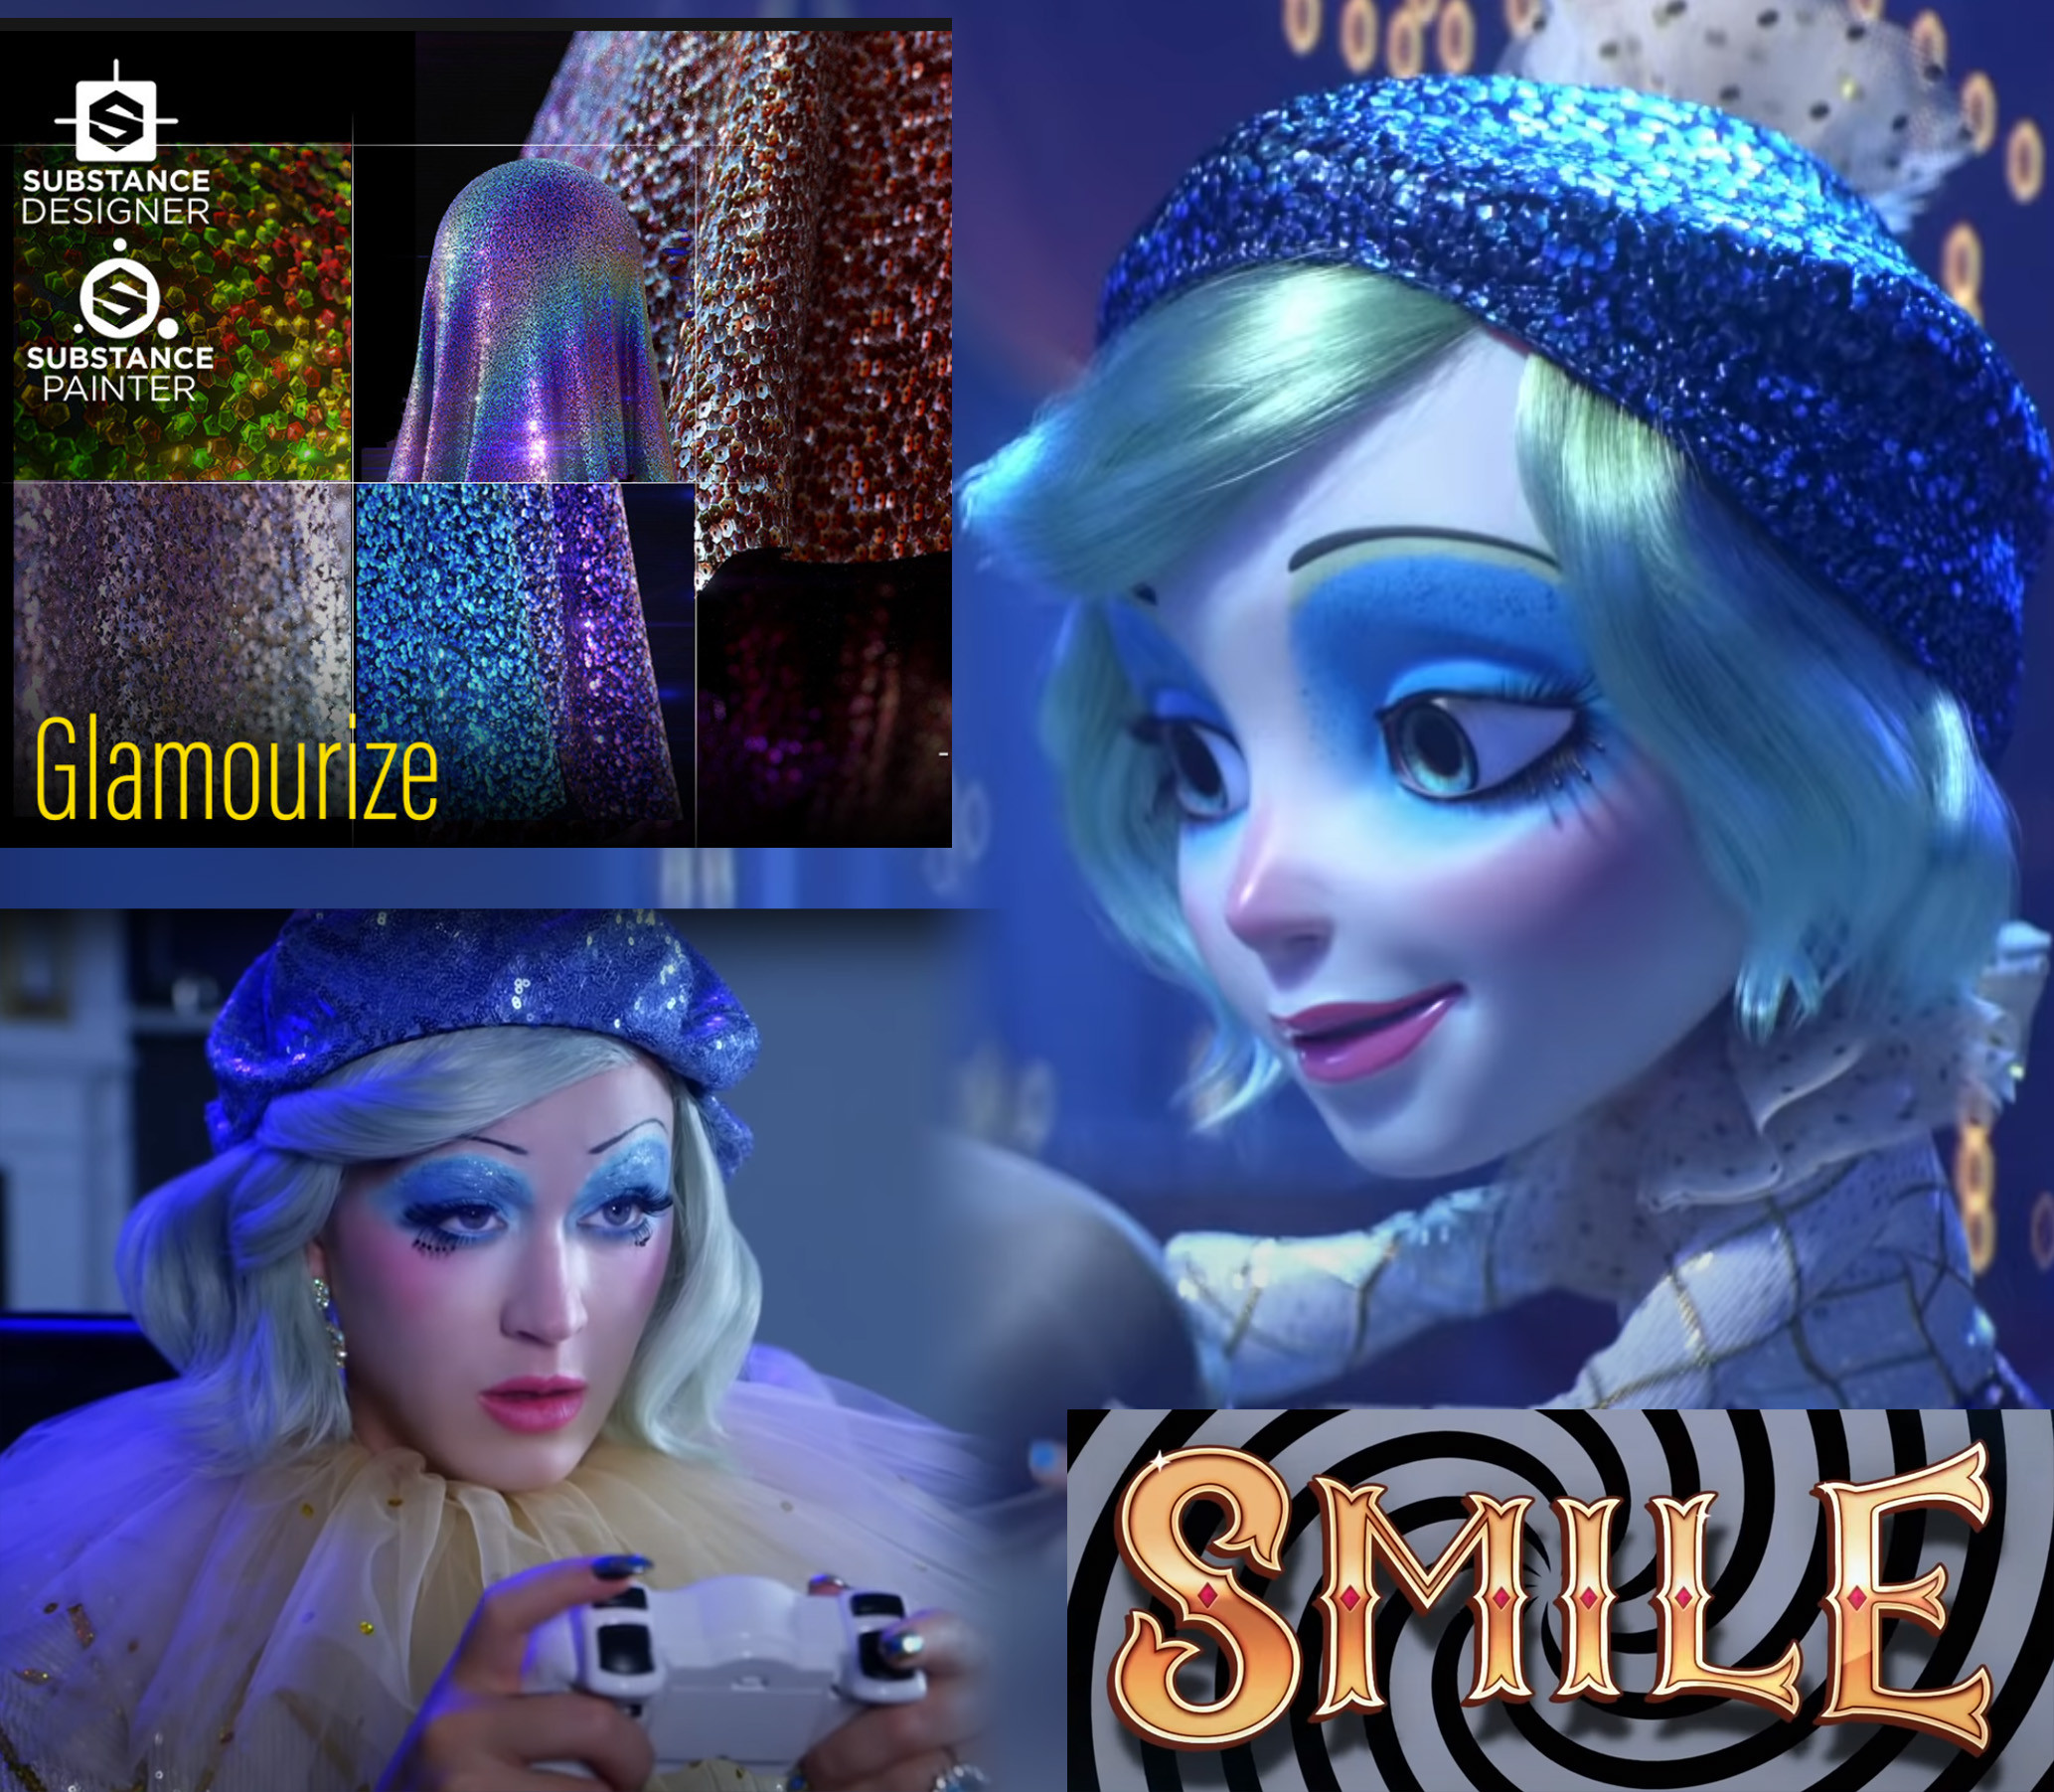 That same Material was used at Katy Perry Music Video - Smile. Her hat is using the Glamourize material :)